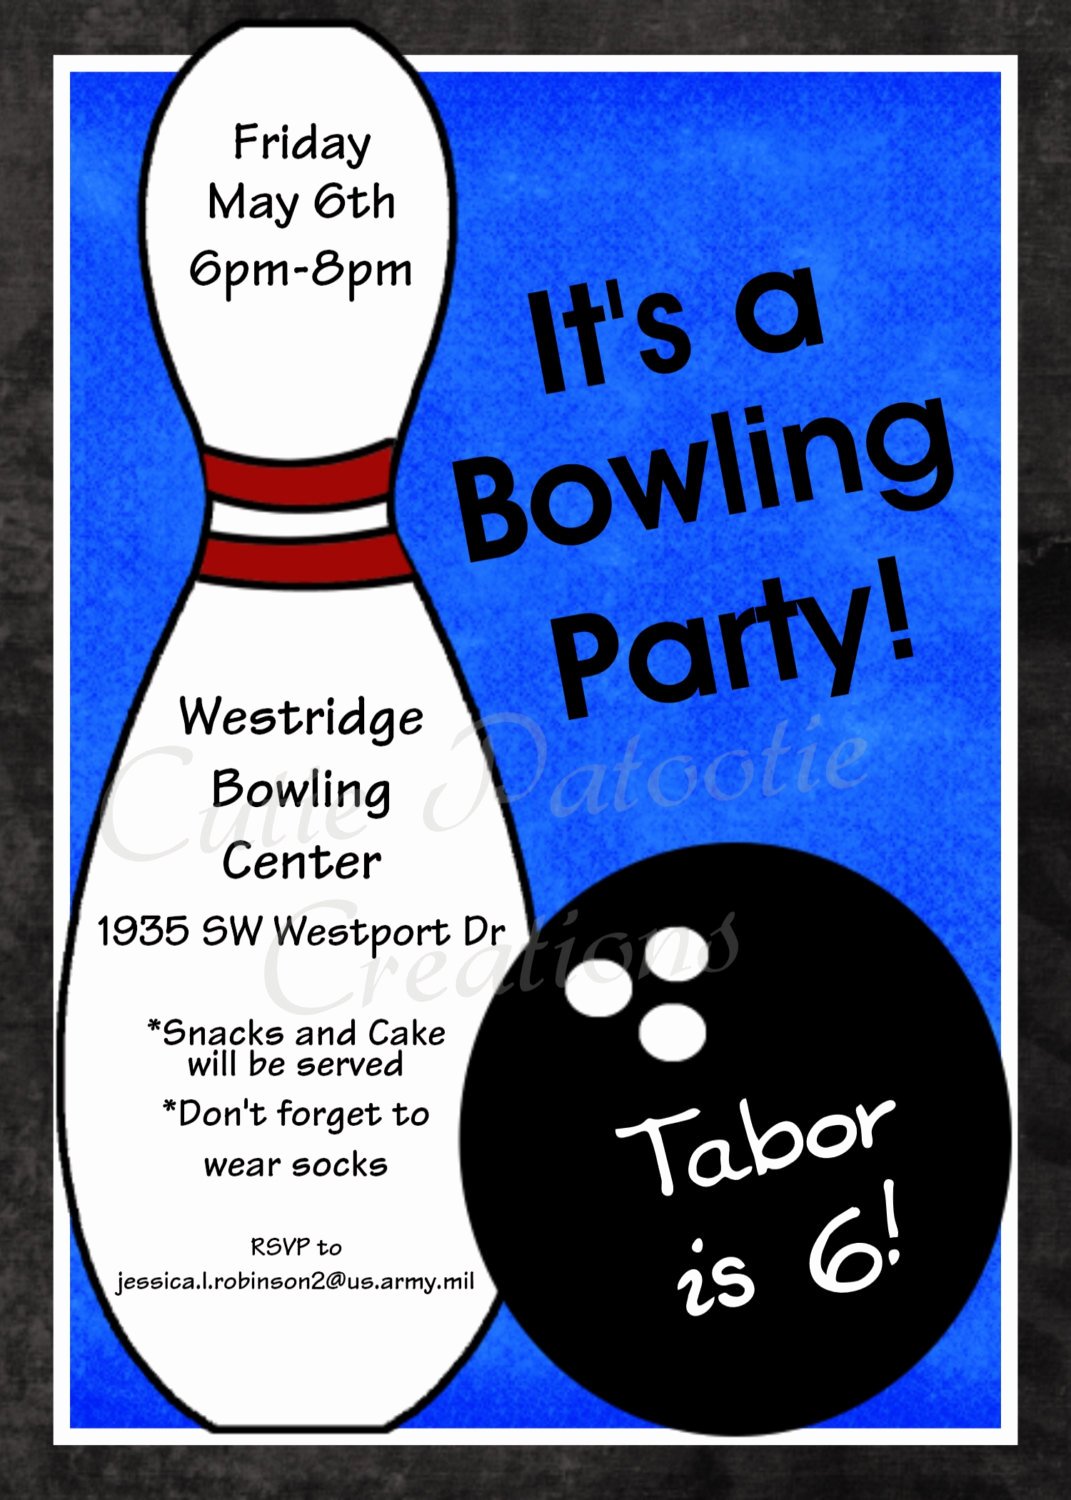 Printable Bowling Party Invitations Beautiful Bowling Birthday Invitation Printable or Printed Party Invite